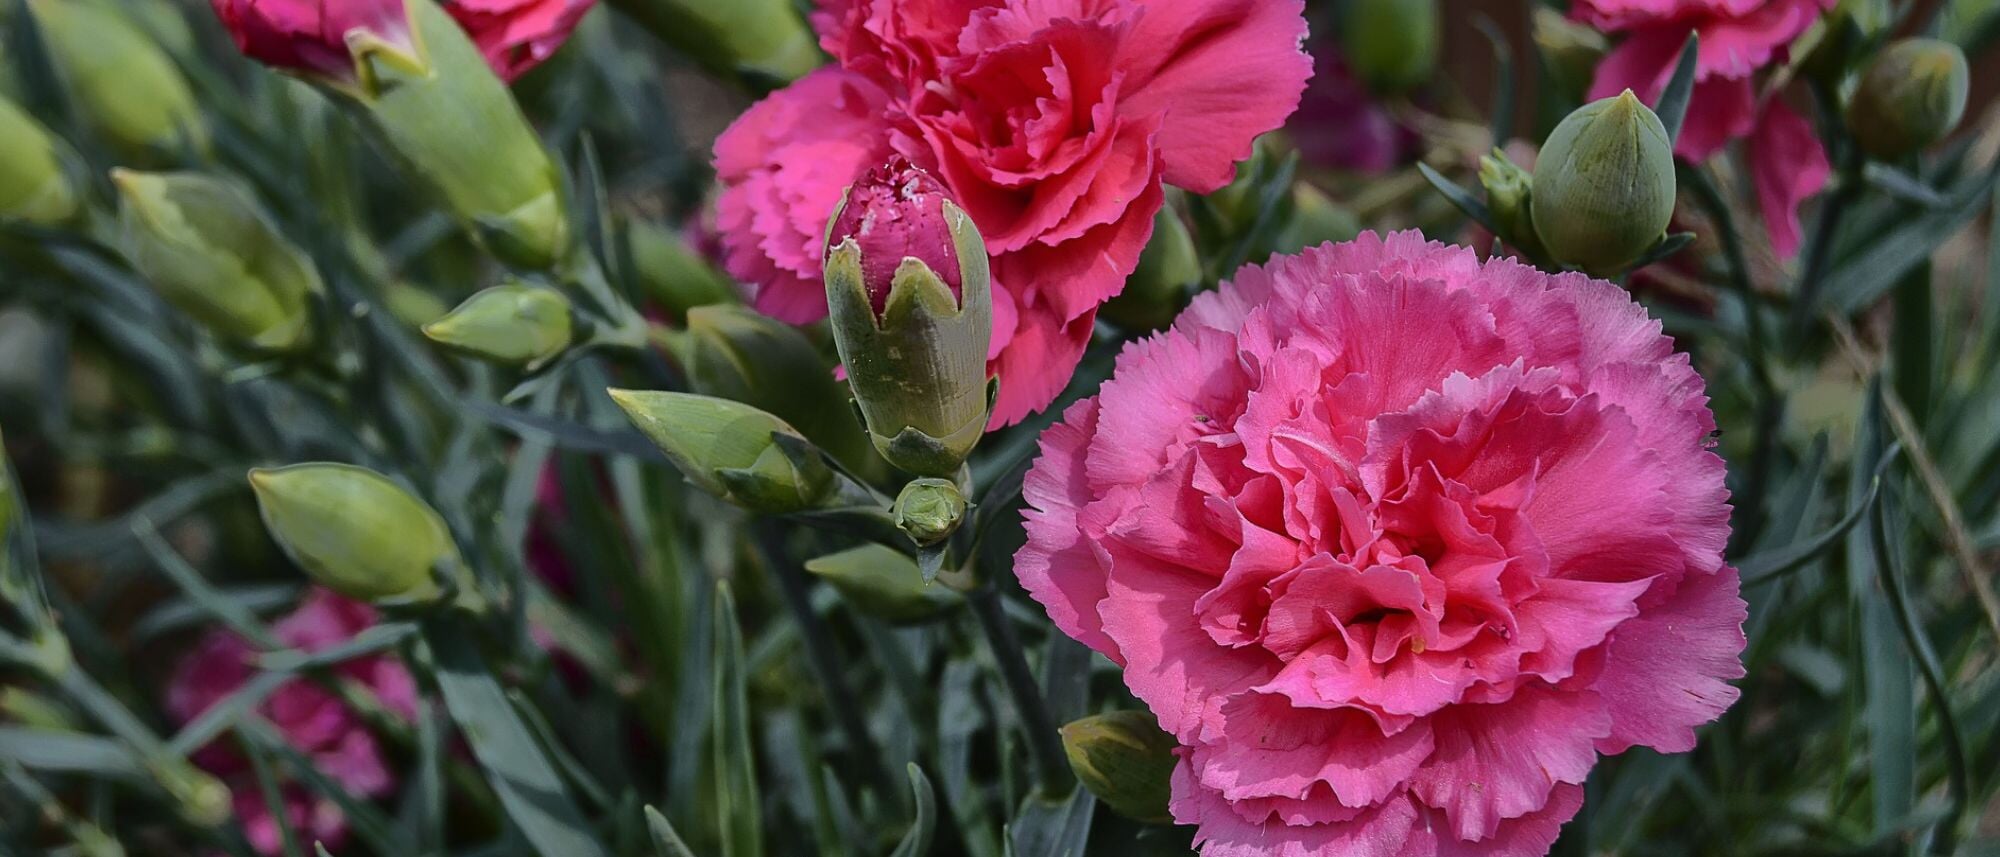 Grow carnations in your flower garden for a pop of color and a flower to put in a bouquet anytime